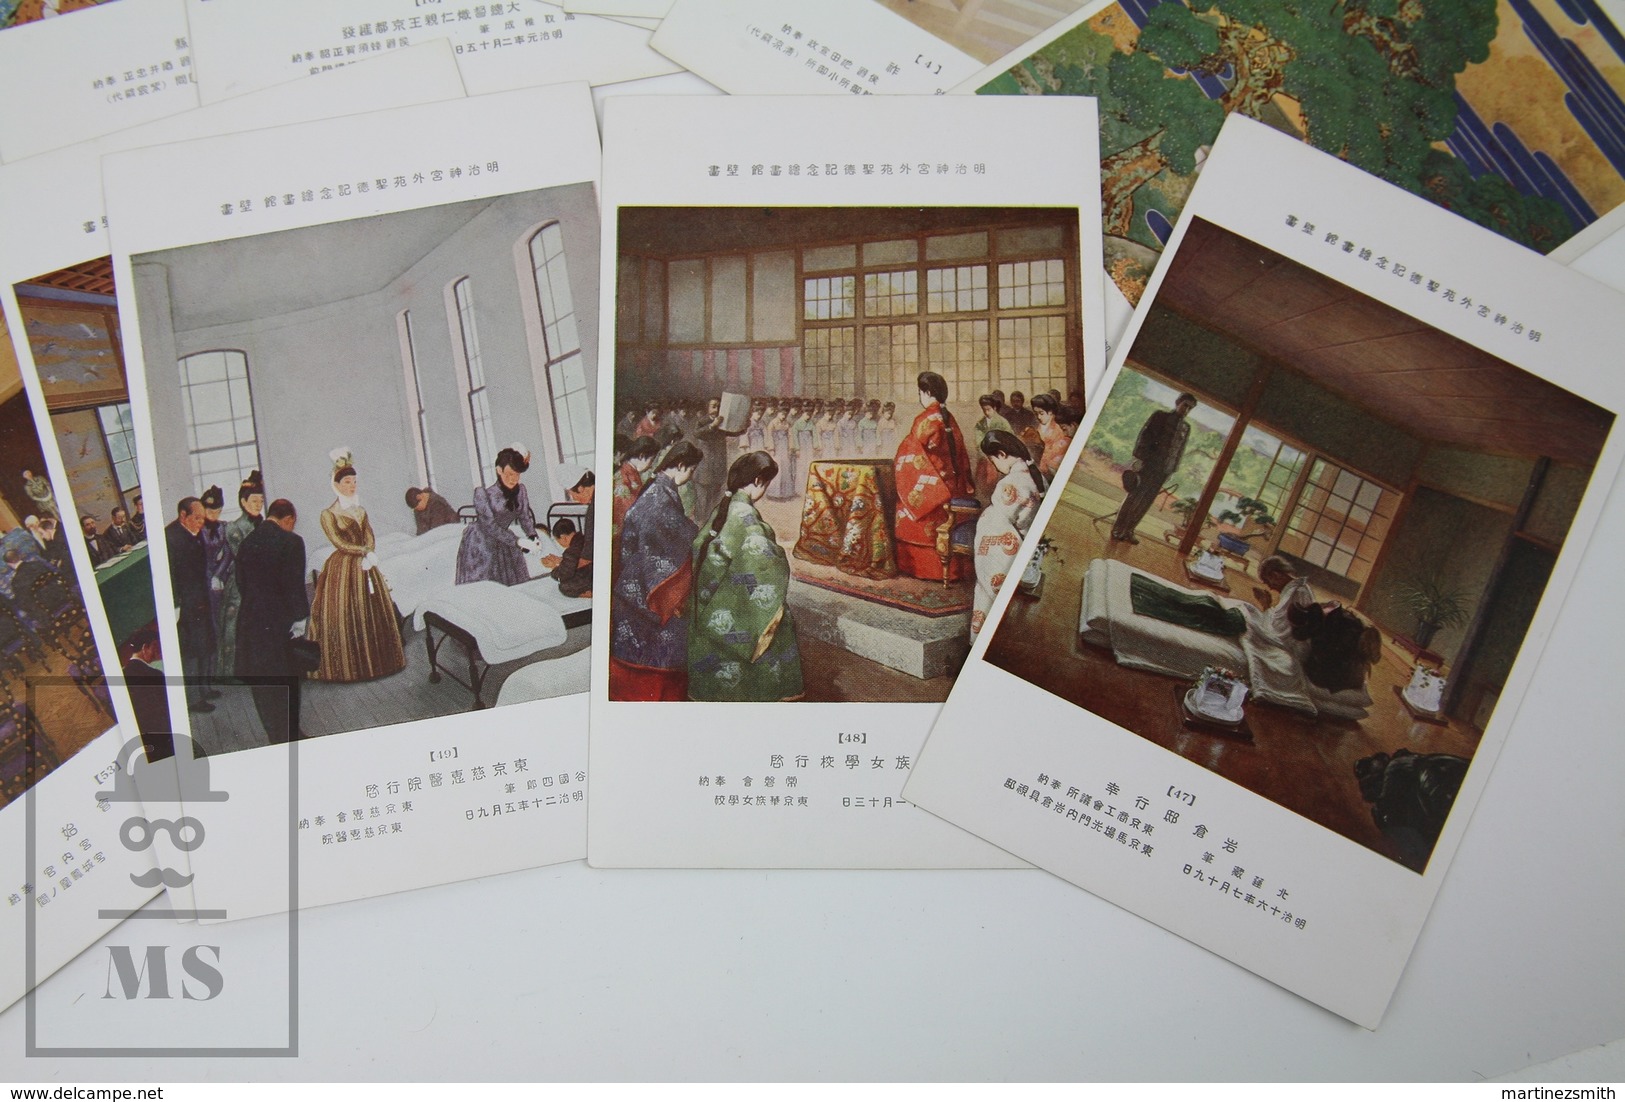 Vintage Japan Postcard Folder  - 40 Different Illustrated Views From Paintings - The History Of Meiji Emperor - WWI - Hiroshima